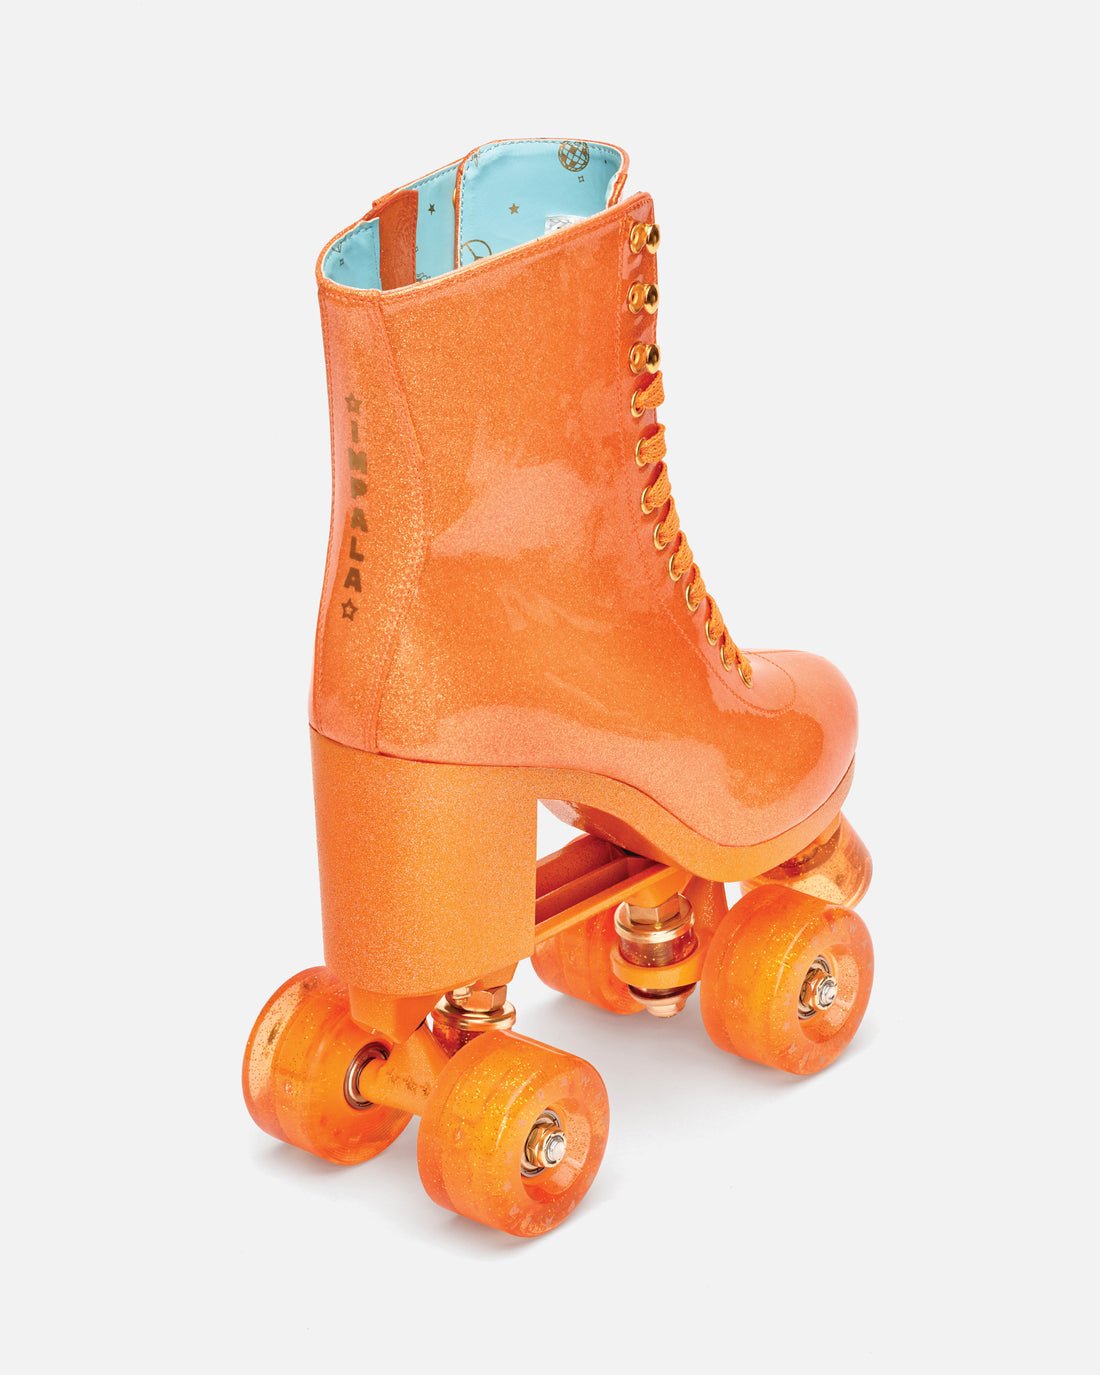 Impala x Marawa High Heel Rollerskates | Excluded From The Free Shipping Offer